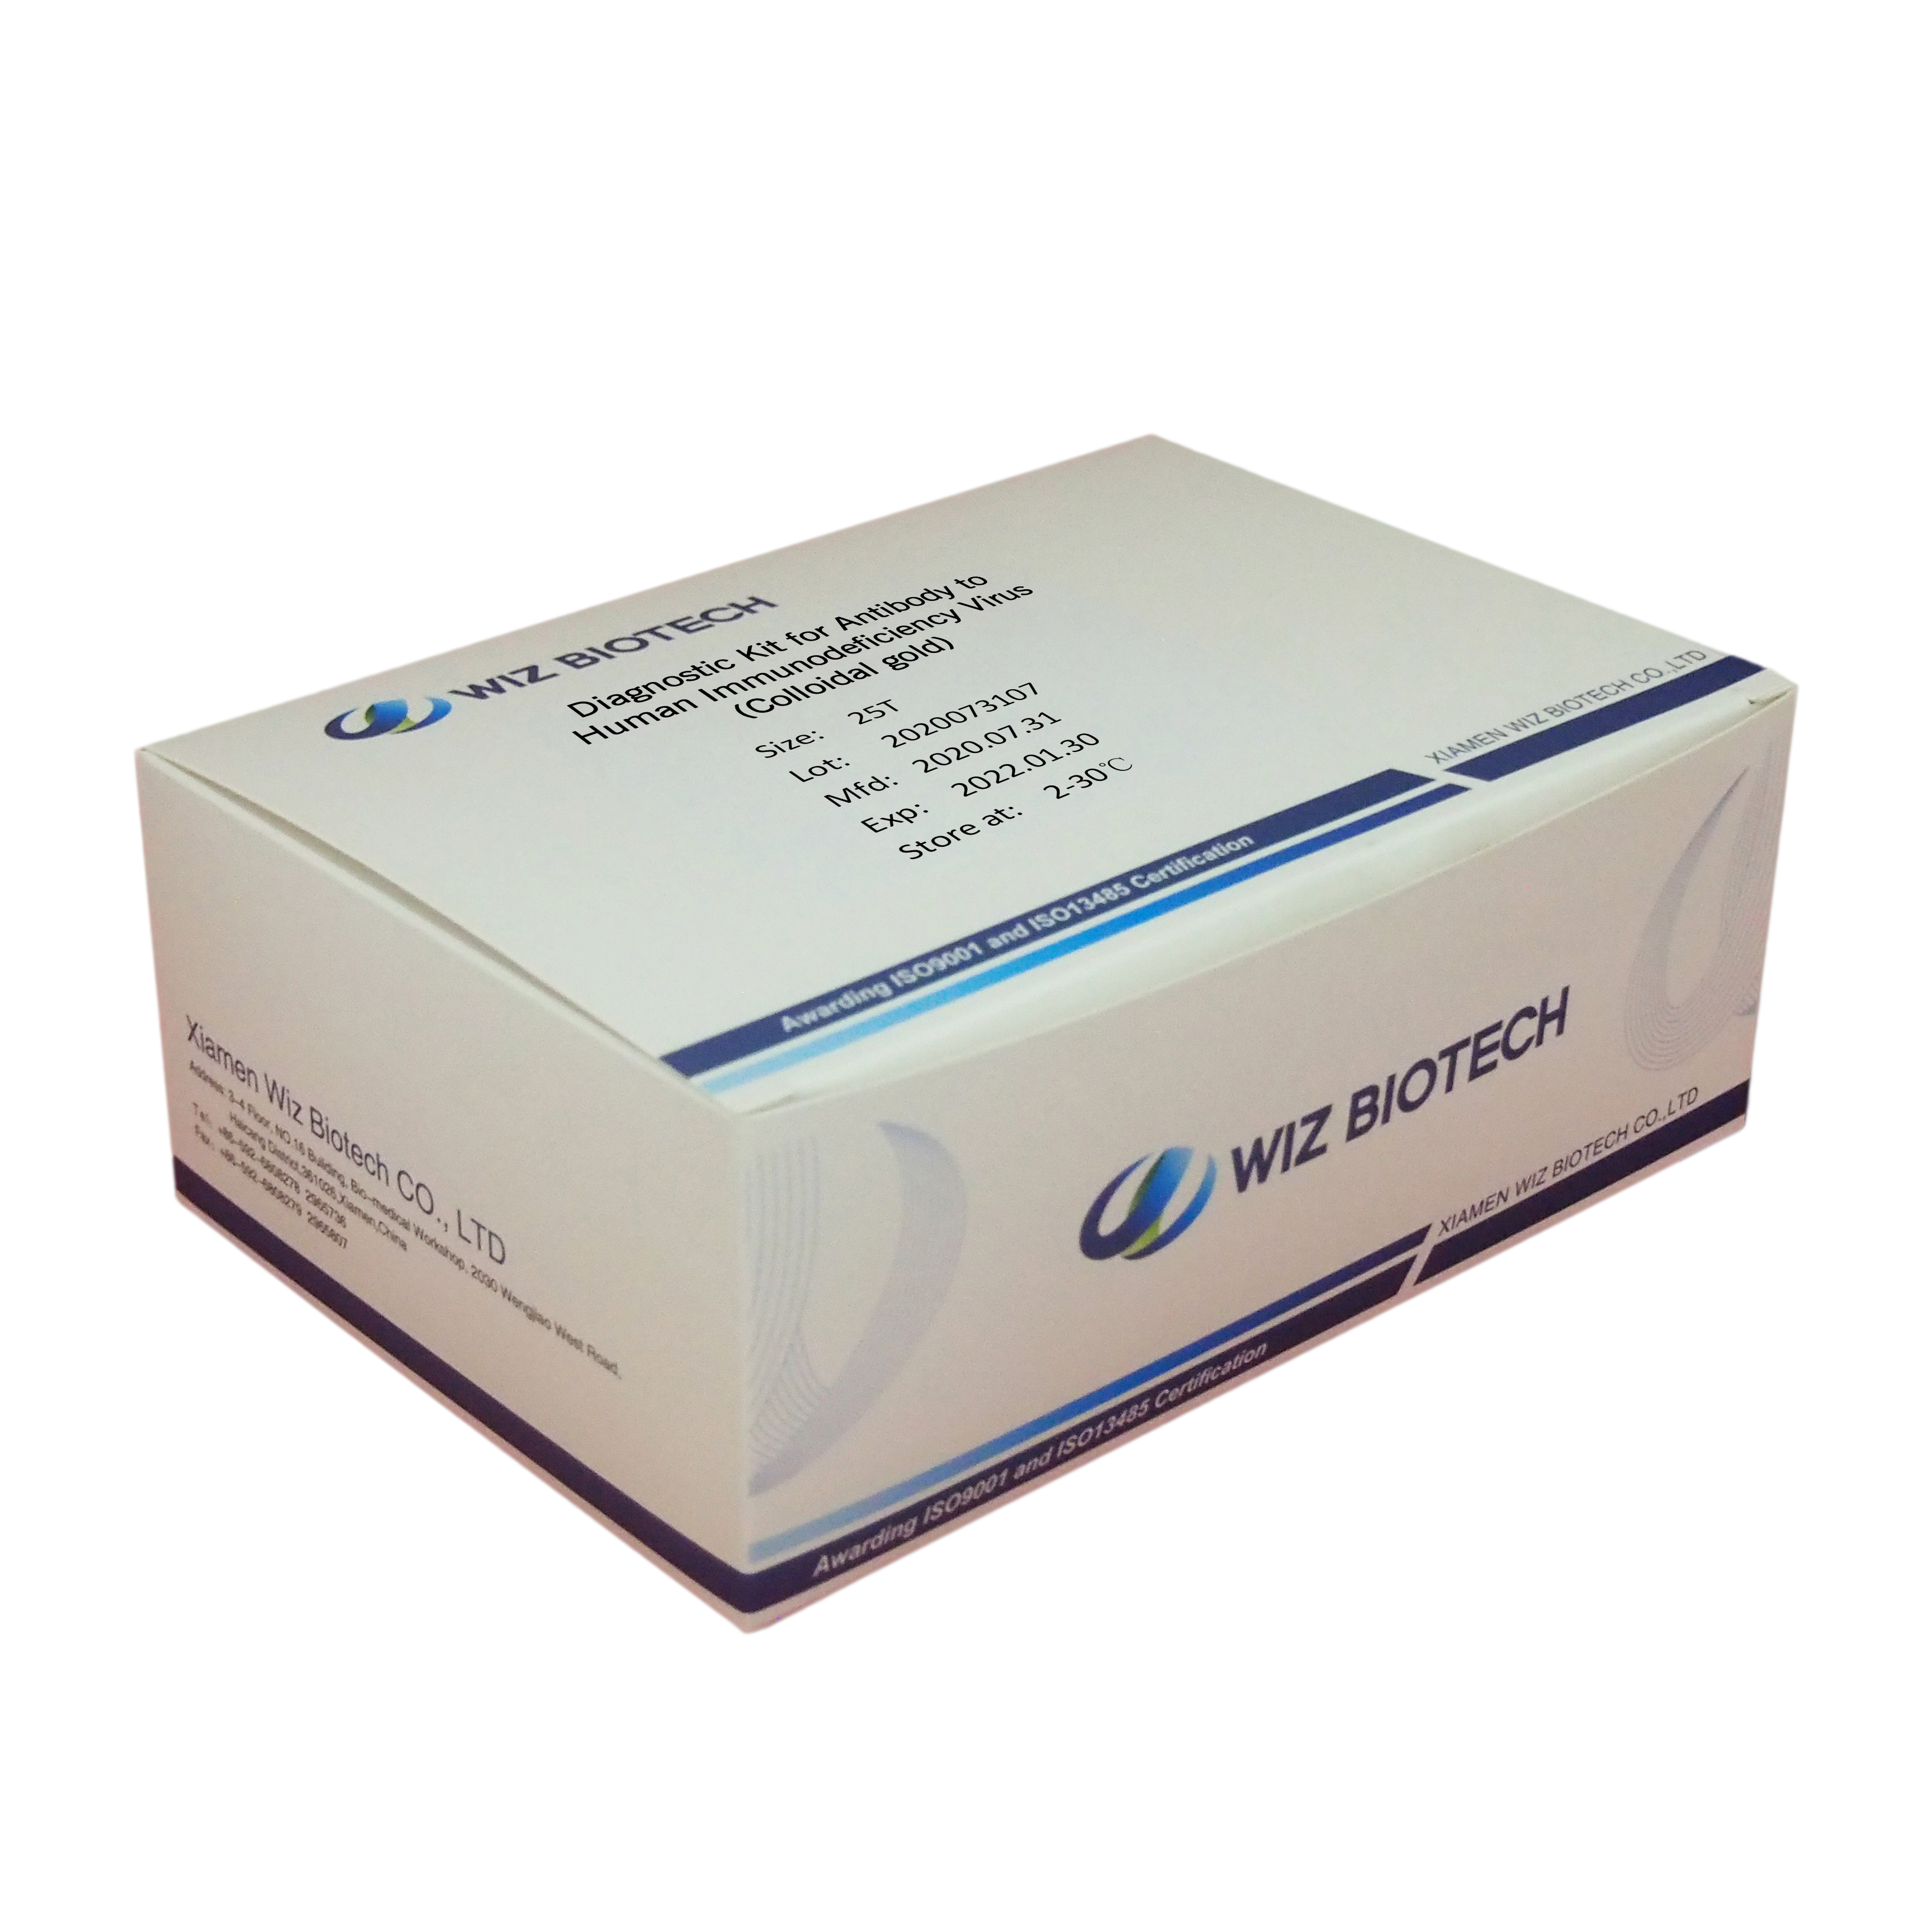 Manufacturing Companies for Elisa Test - Diagnostic Kit for Antibody P24 antigen to Human Immunodeficiency Virus HIV Colloidal Gold – Baysen